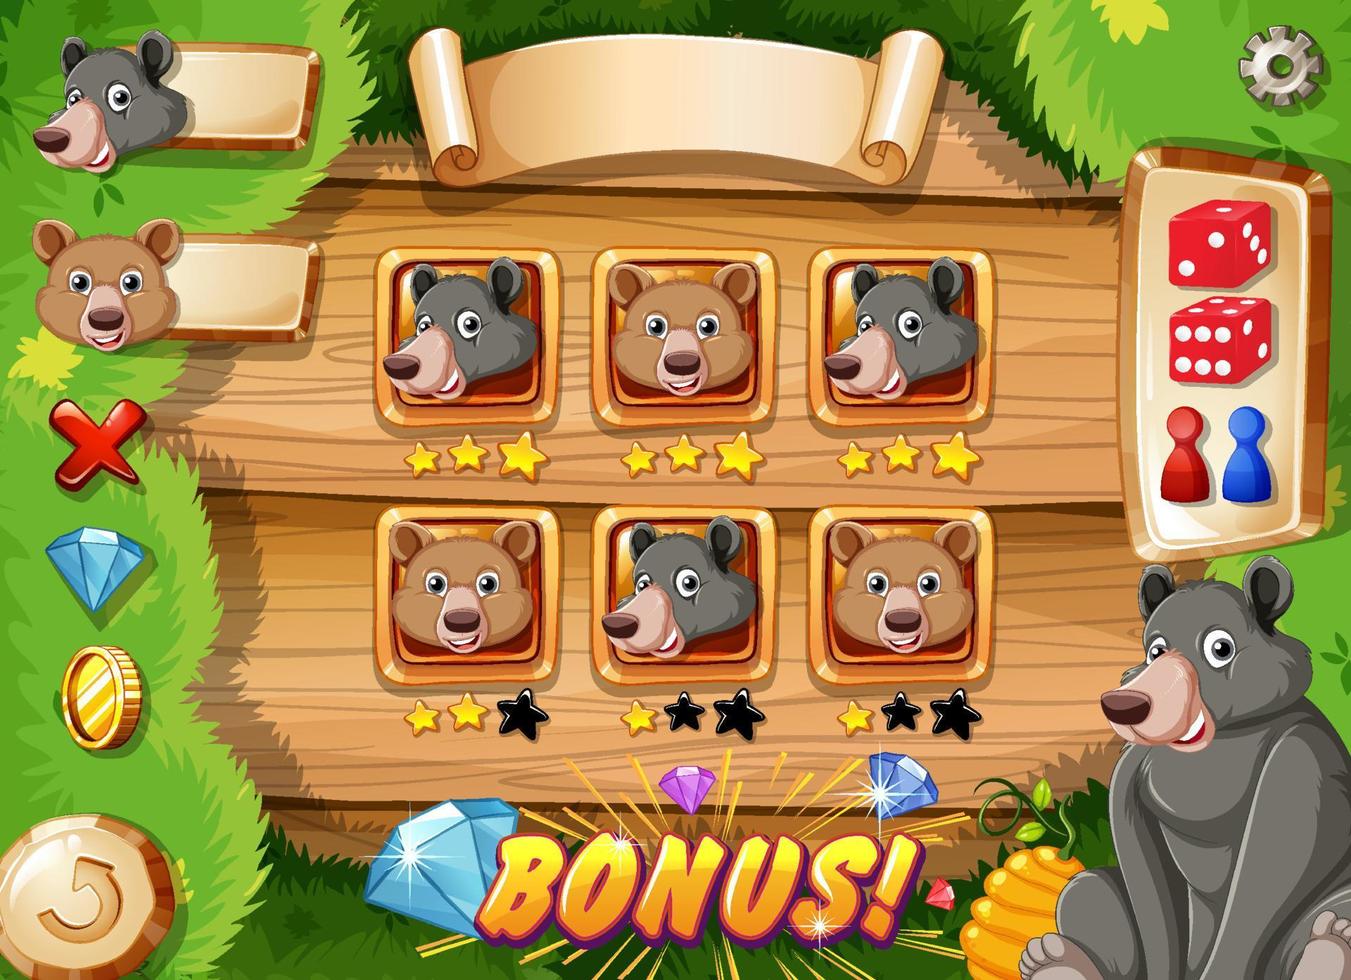 Game template design with bears in the woods vector